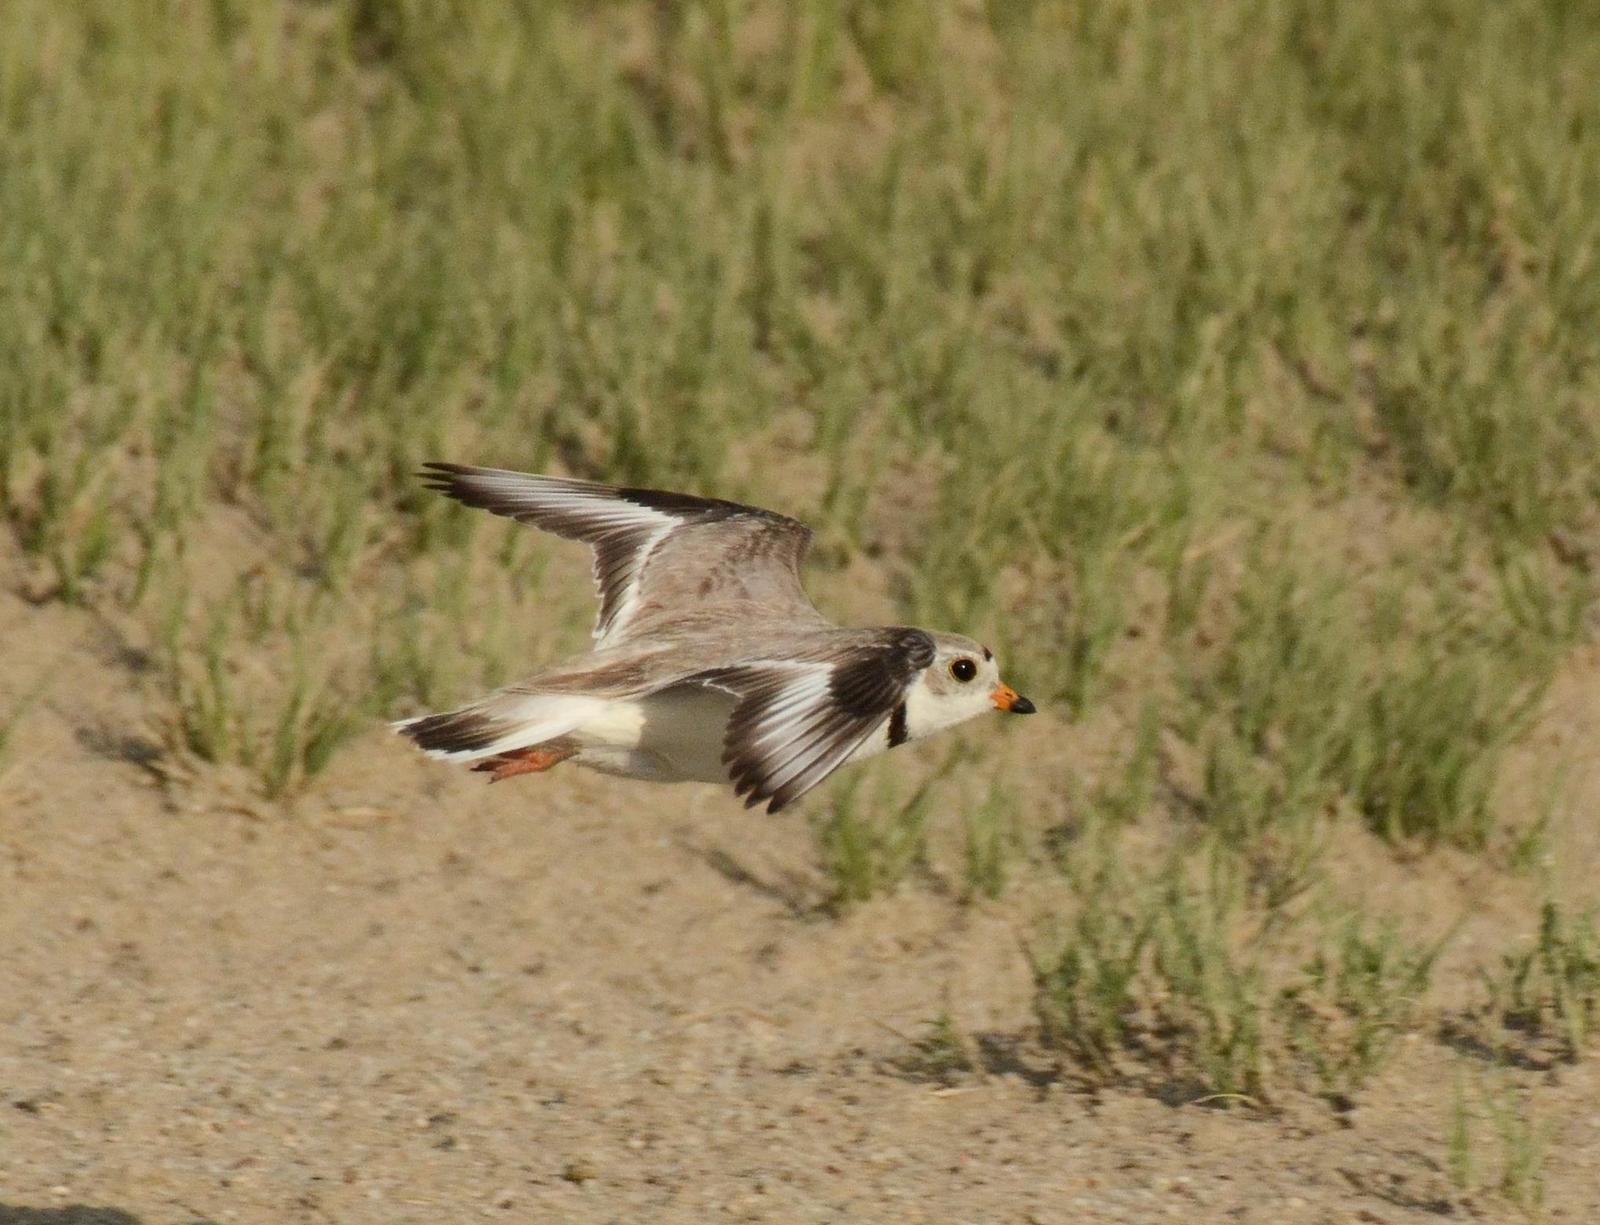 Piping Plover Photo by Steven Mlodinow